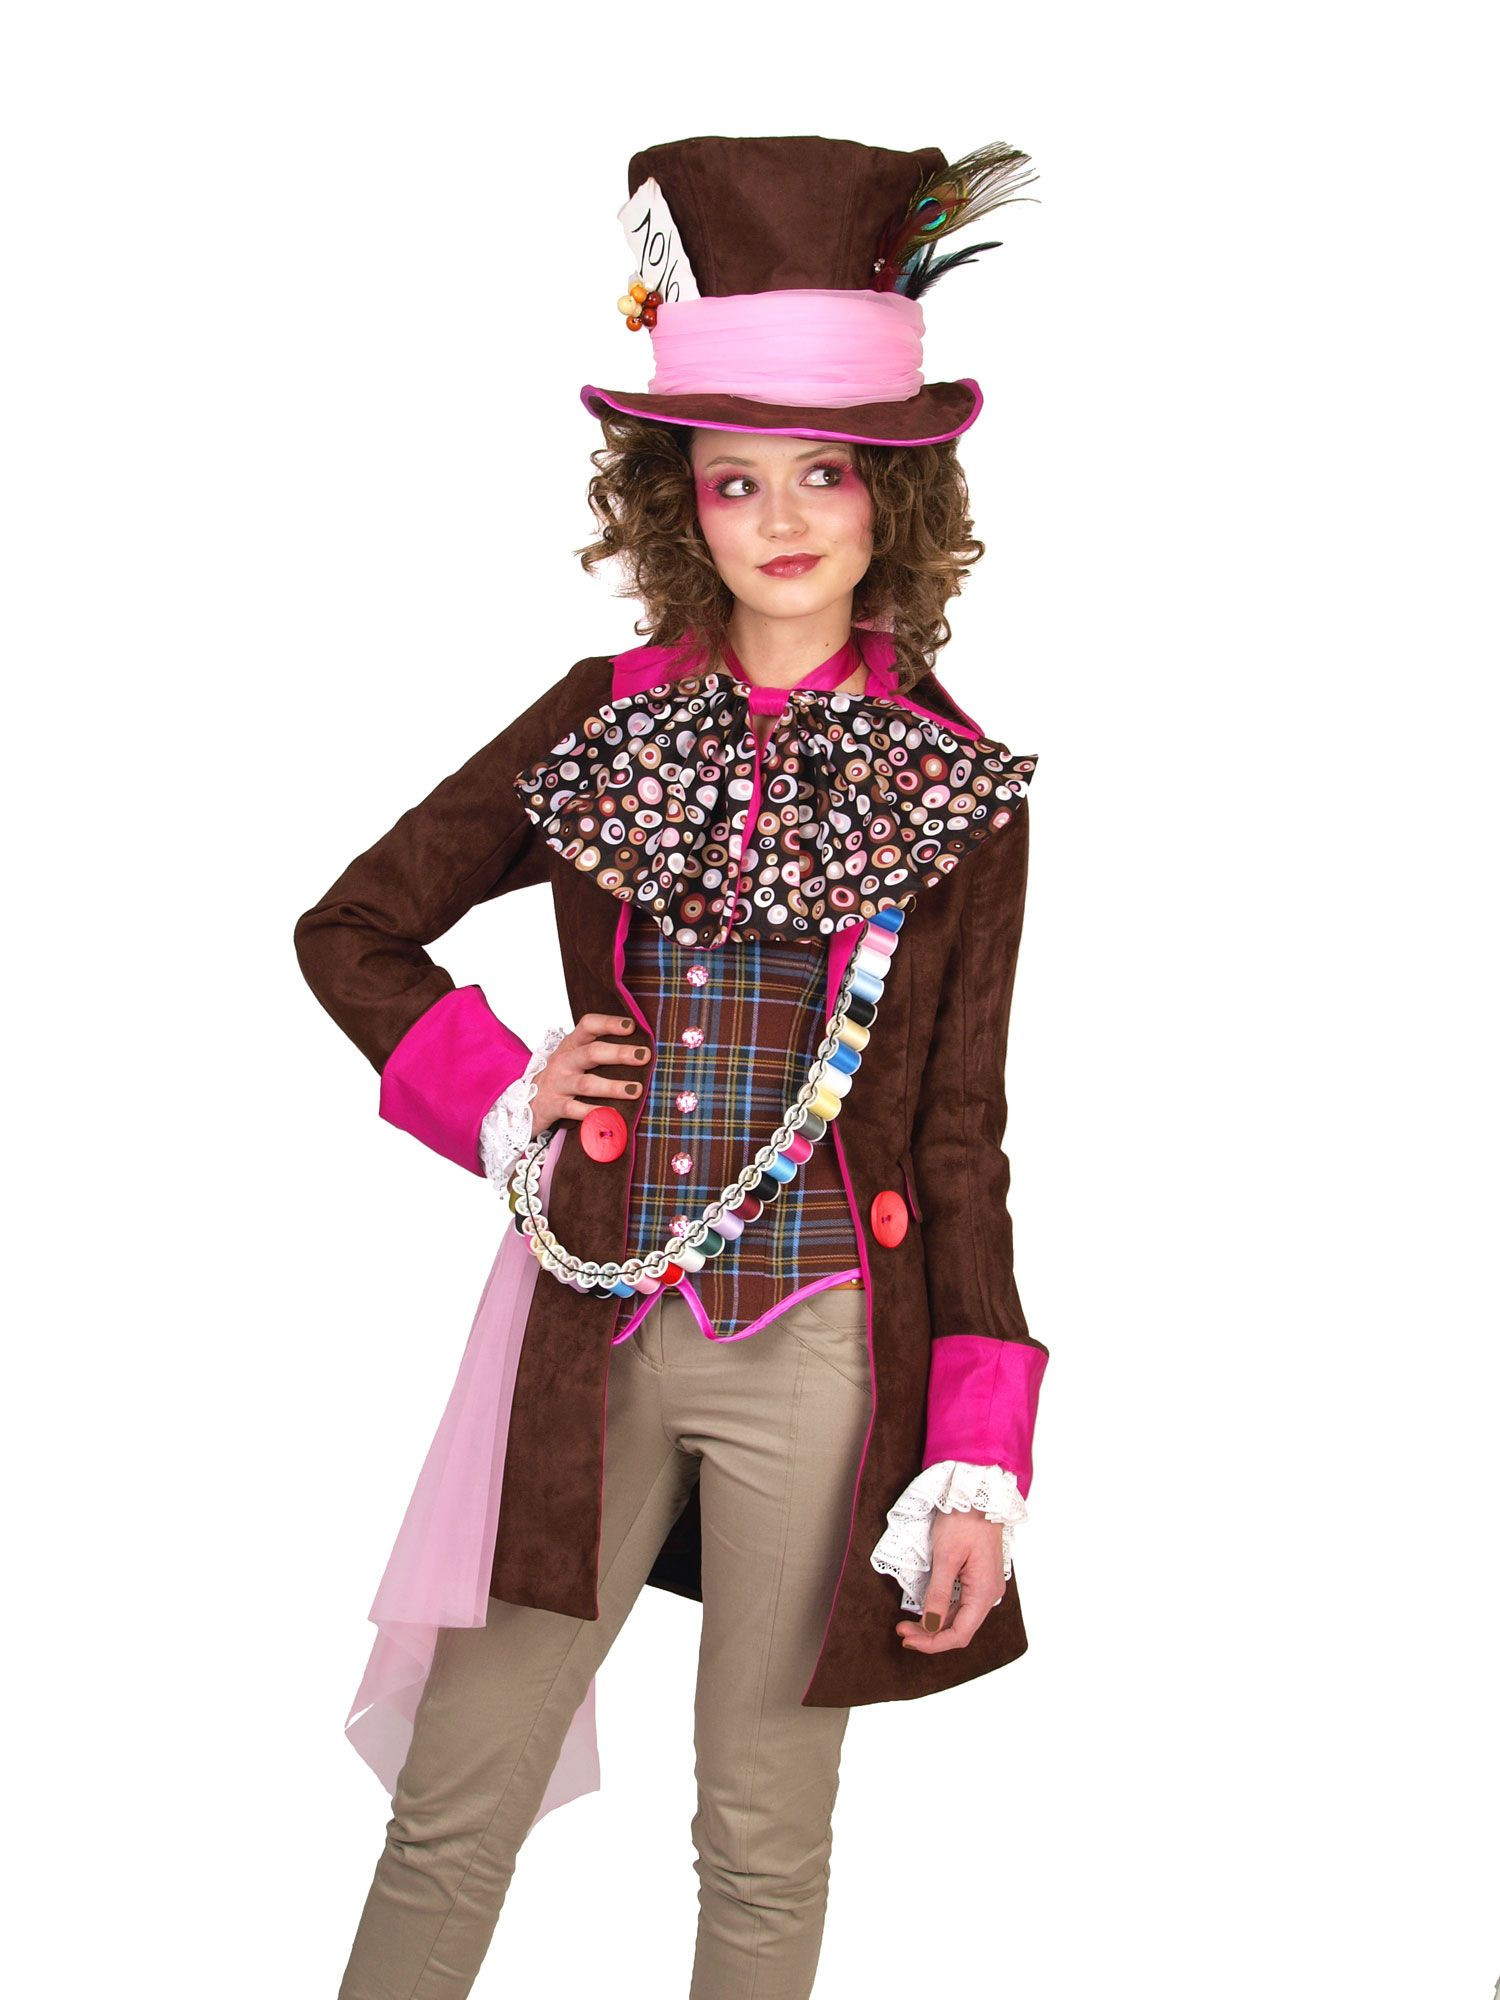 Mad Hatter Tea Party Costume Ideas
 Mad Hatter Costumes on Pinterest